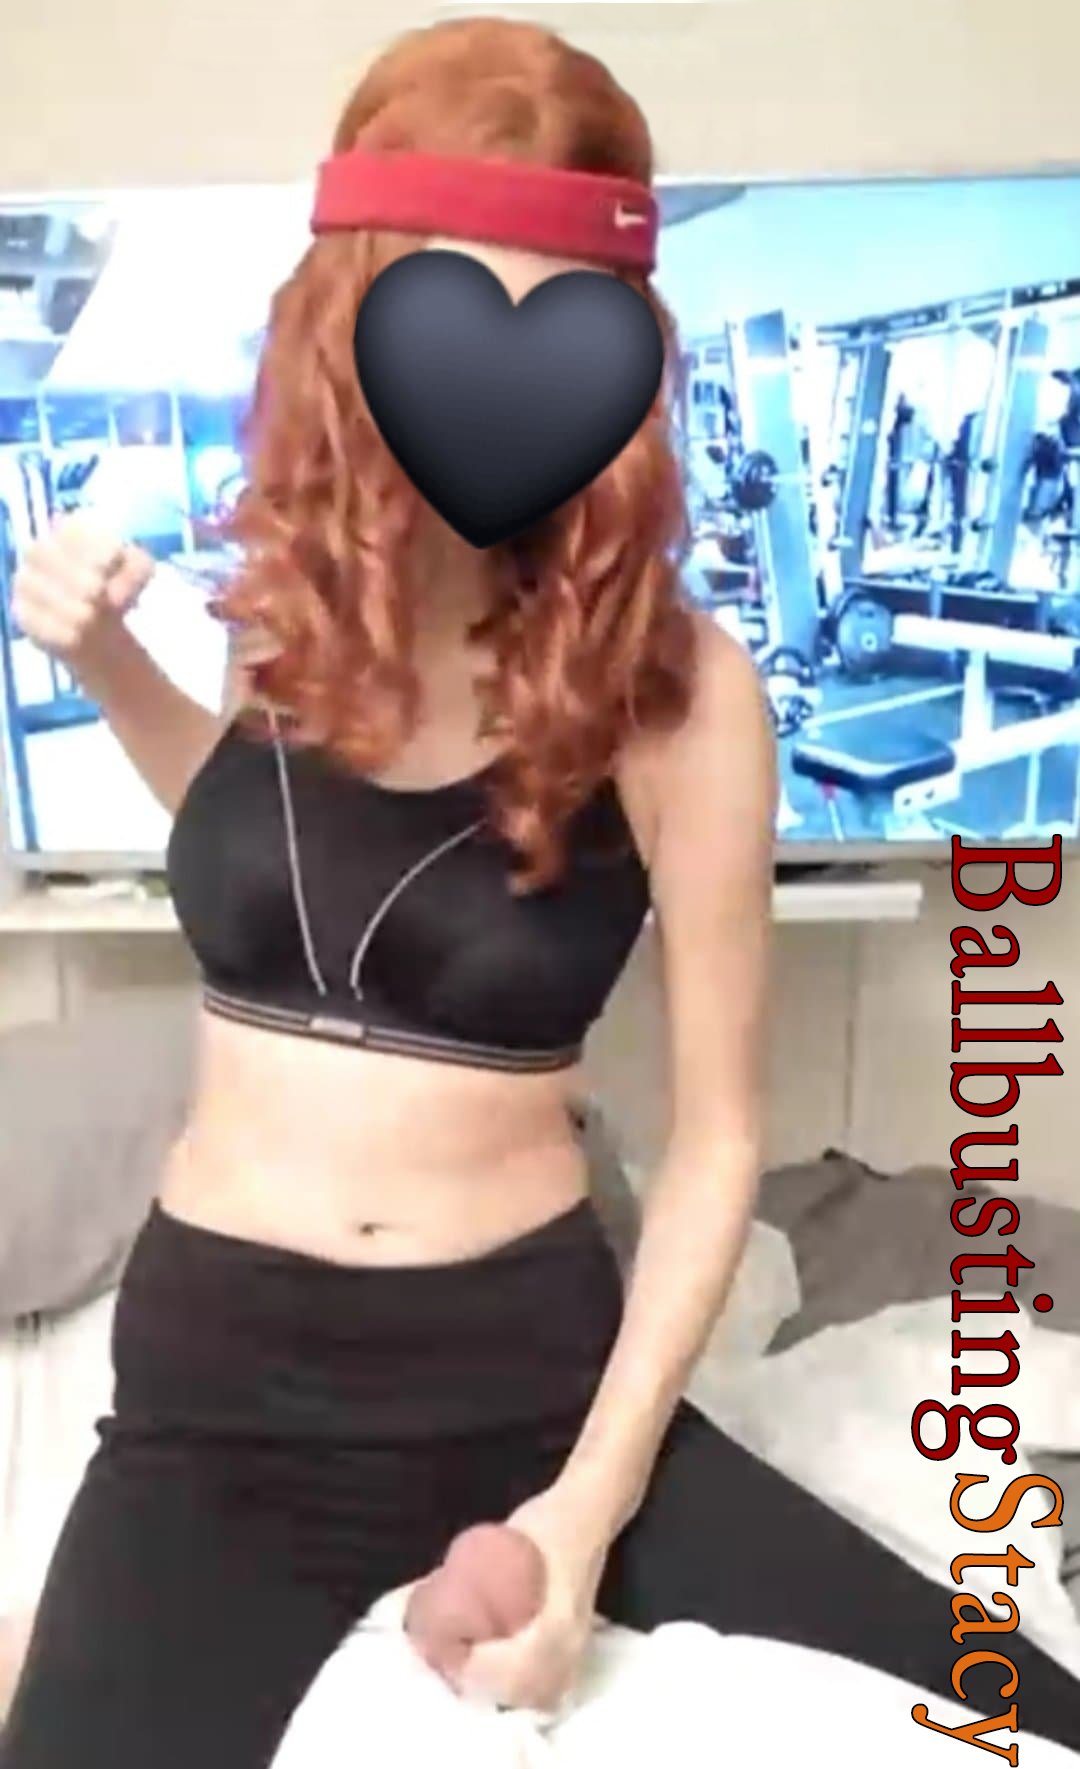 Is everyone keeping fit!? I did an intense #Ballbusting #HomeWorkout on my Onlyfans. I repeatedly squeeze